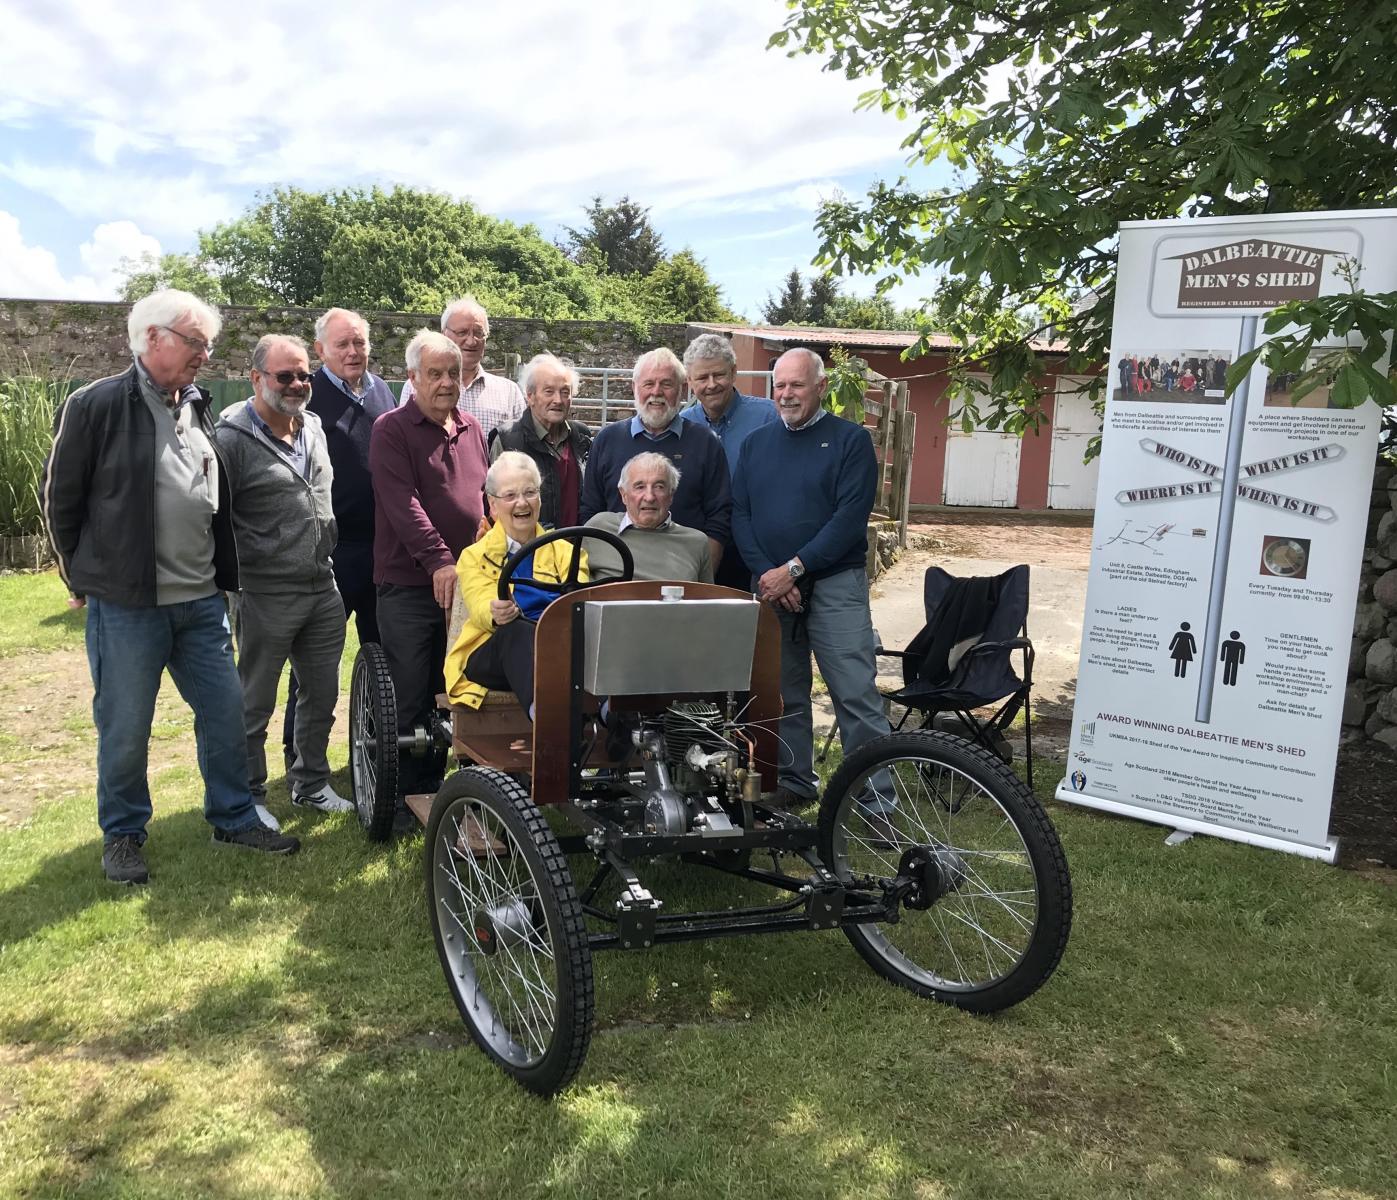 <p>Sunday 9 th June was cloudy but remained dry and warm, this combined with the added attraction of veteran, vintage and cherished cars made for a record attendance at Wm Kennedy’s Orroland Lodge annual open day with the Skeoch display front and centre.</p>